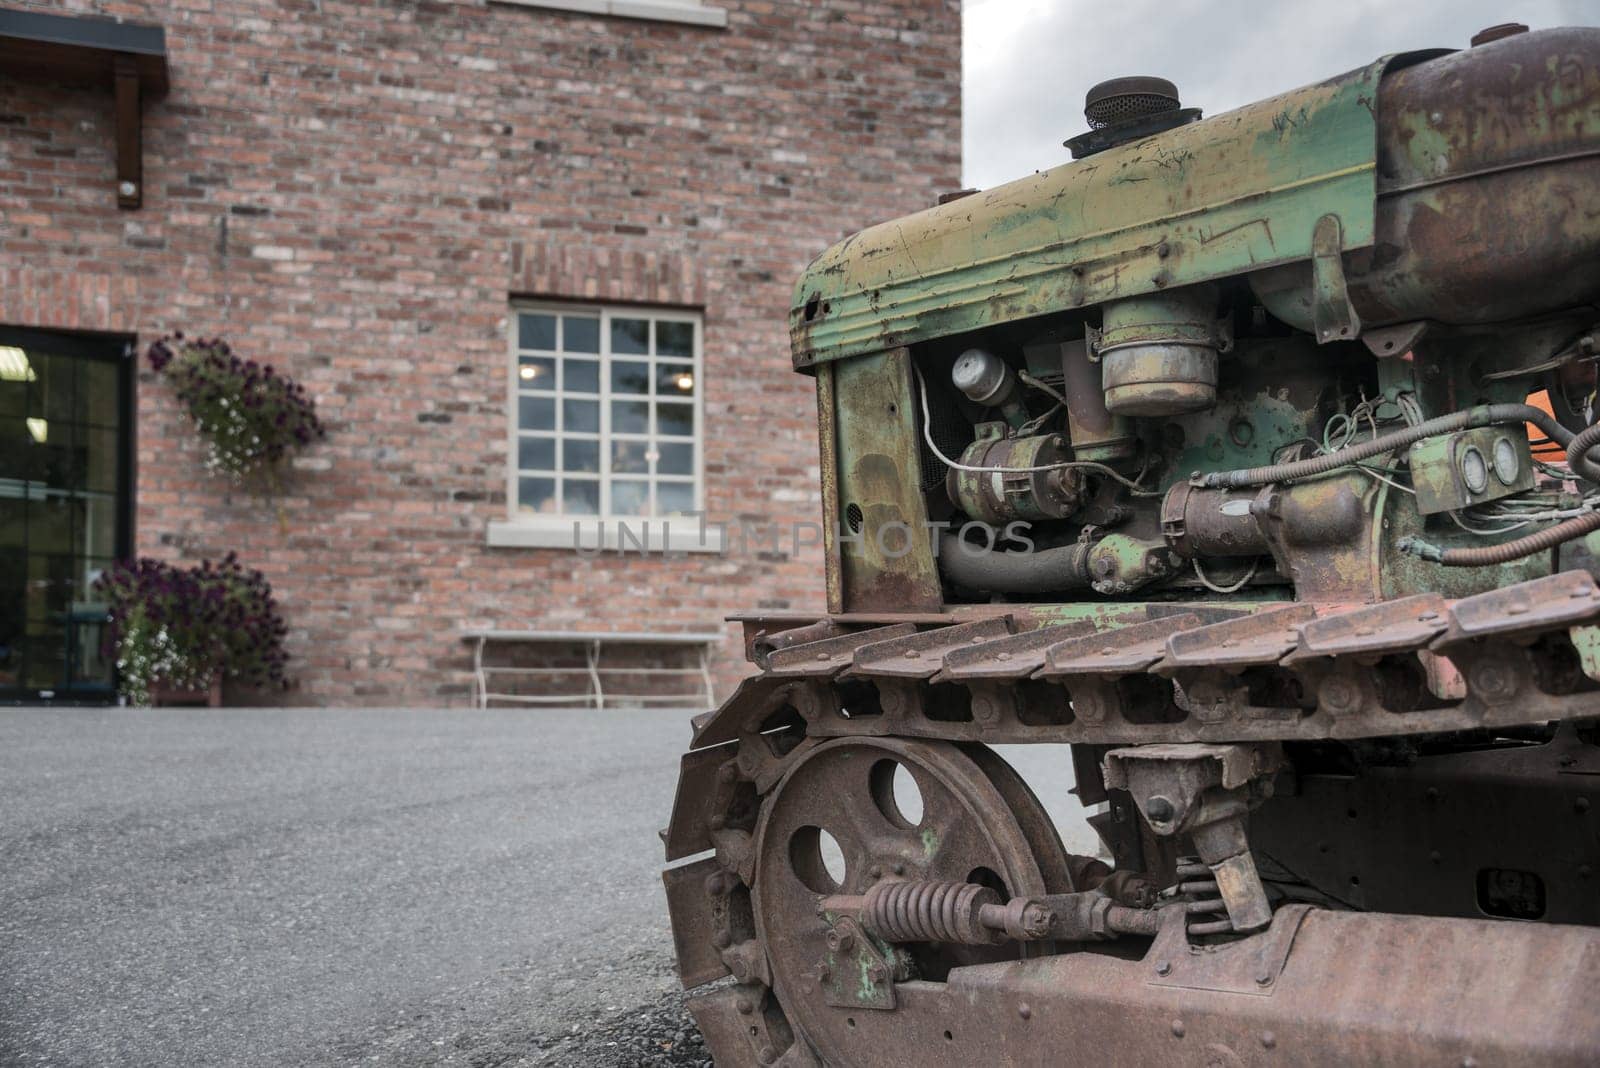 Old rasty tracked tractor in front of brick building on a farm